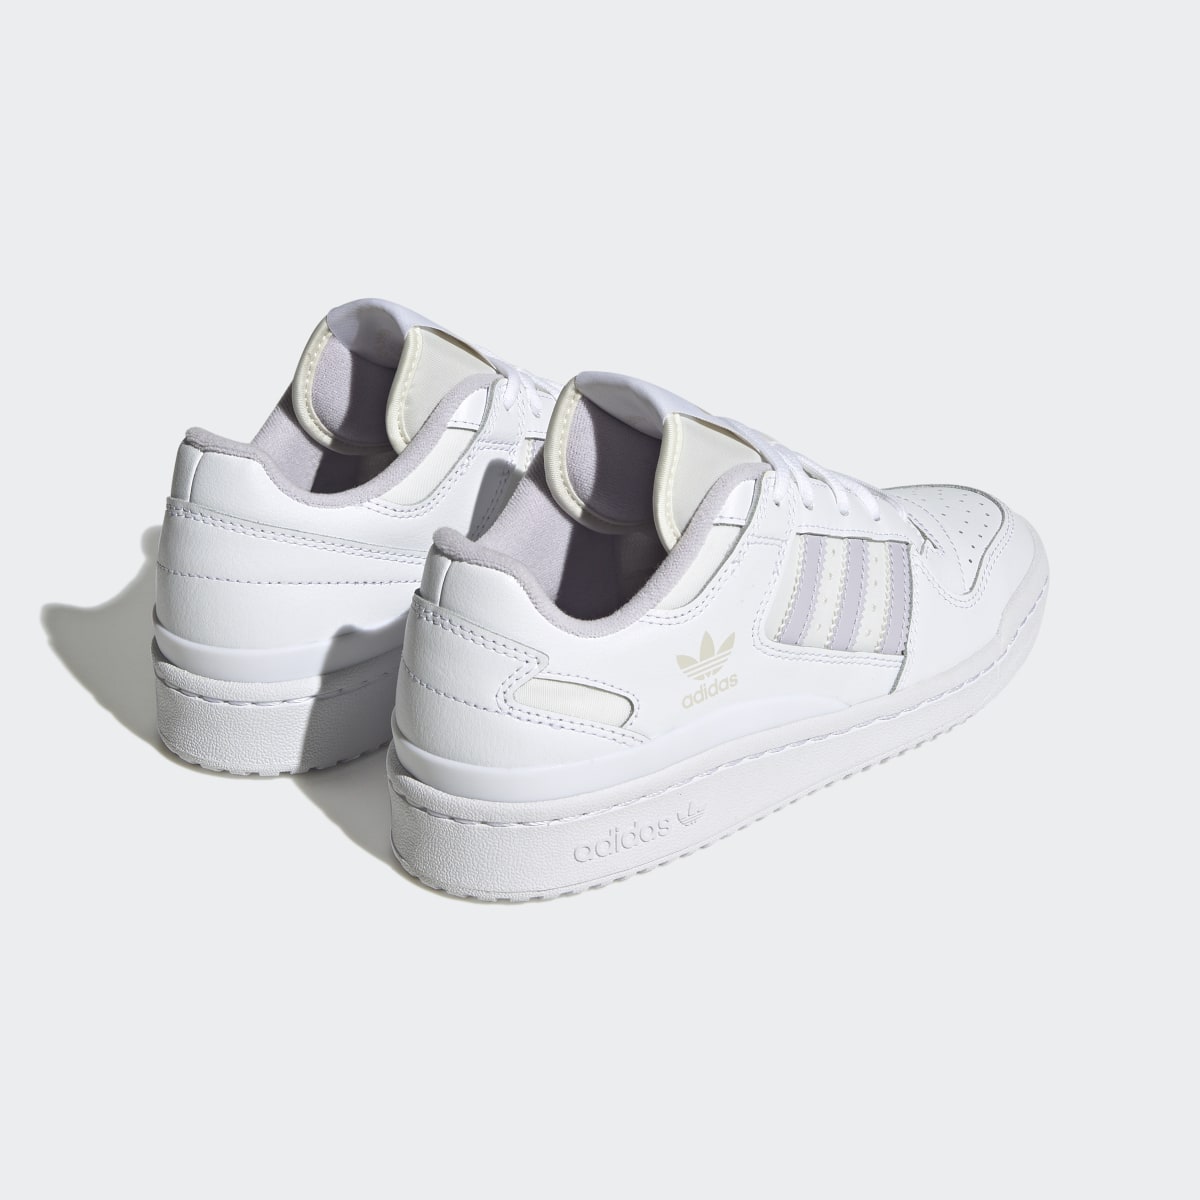 Adidas Forum Low Classic Shoes. 6